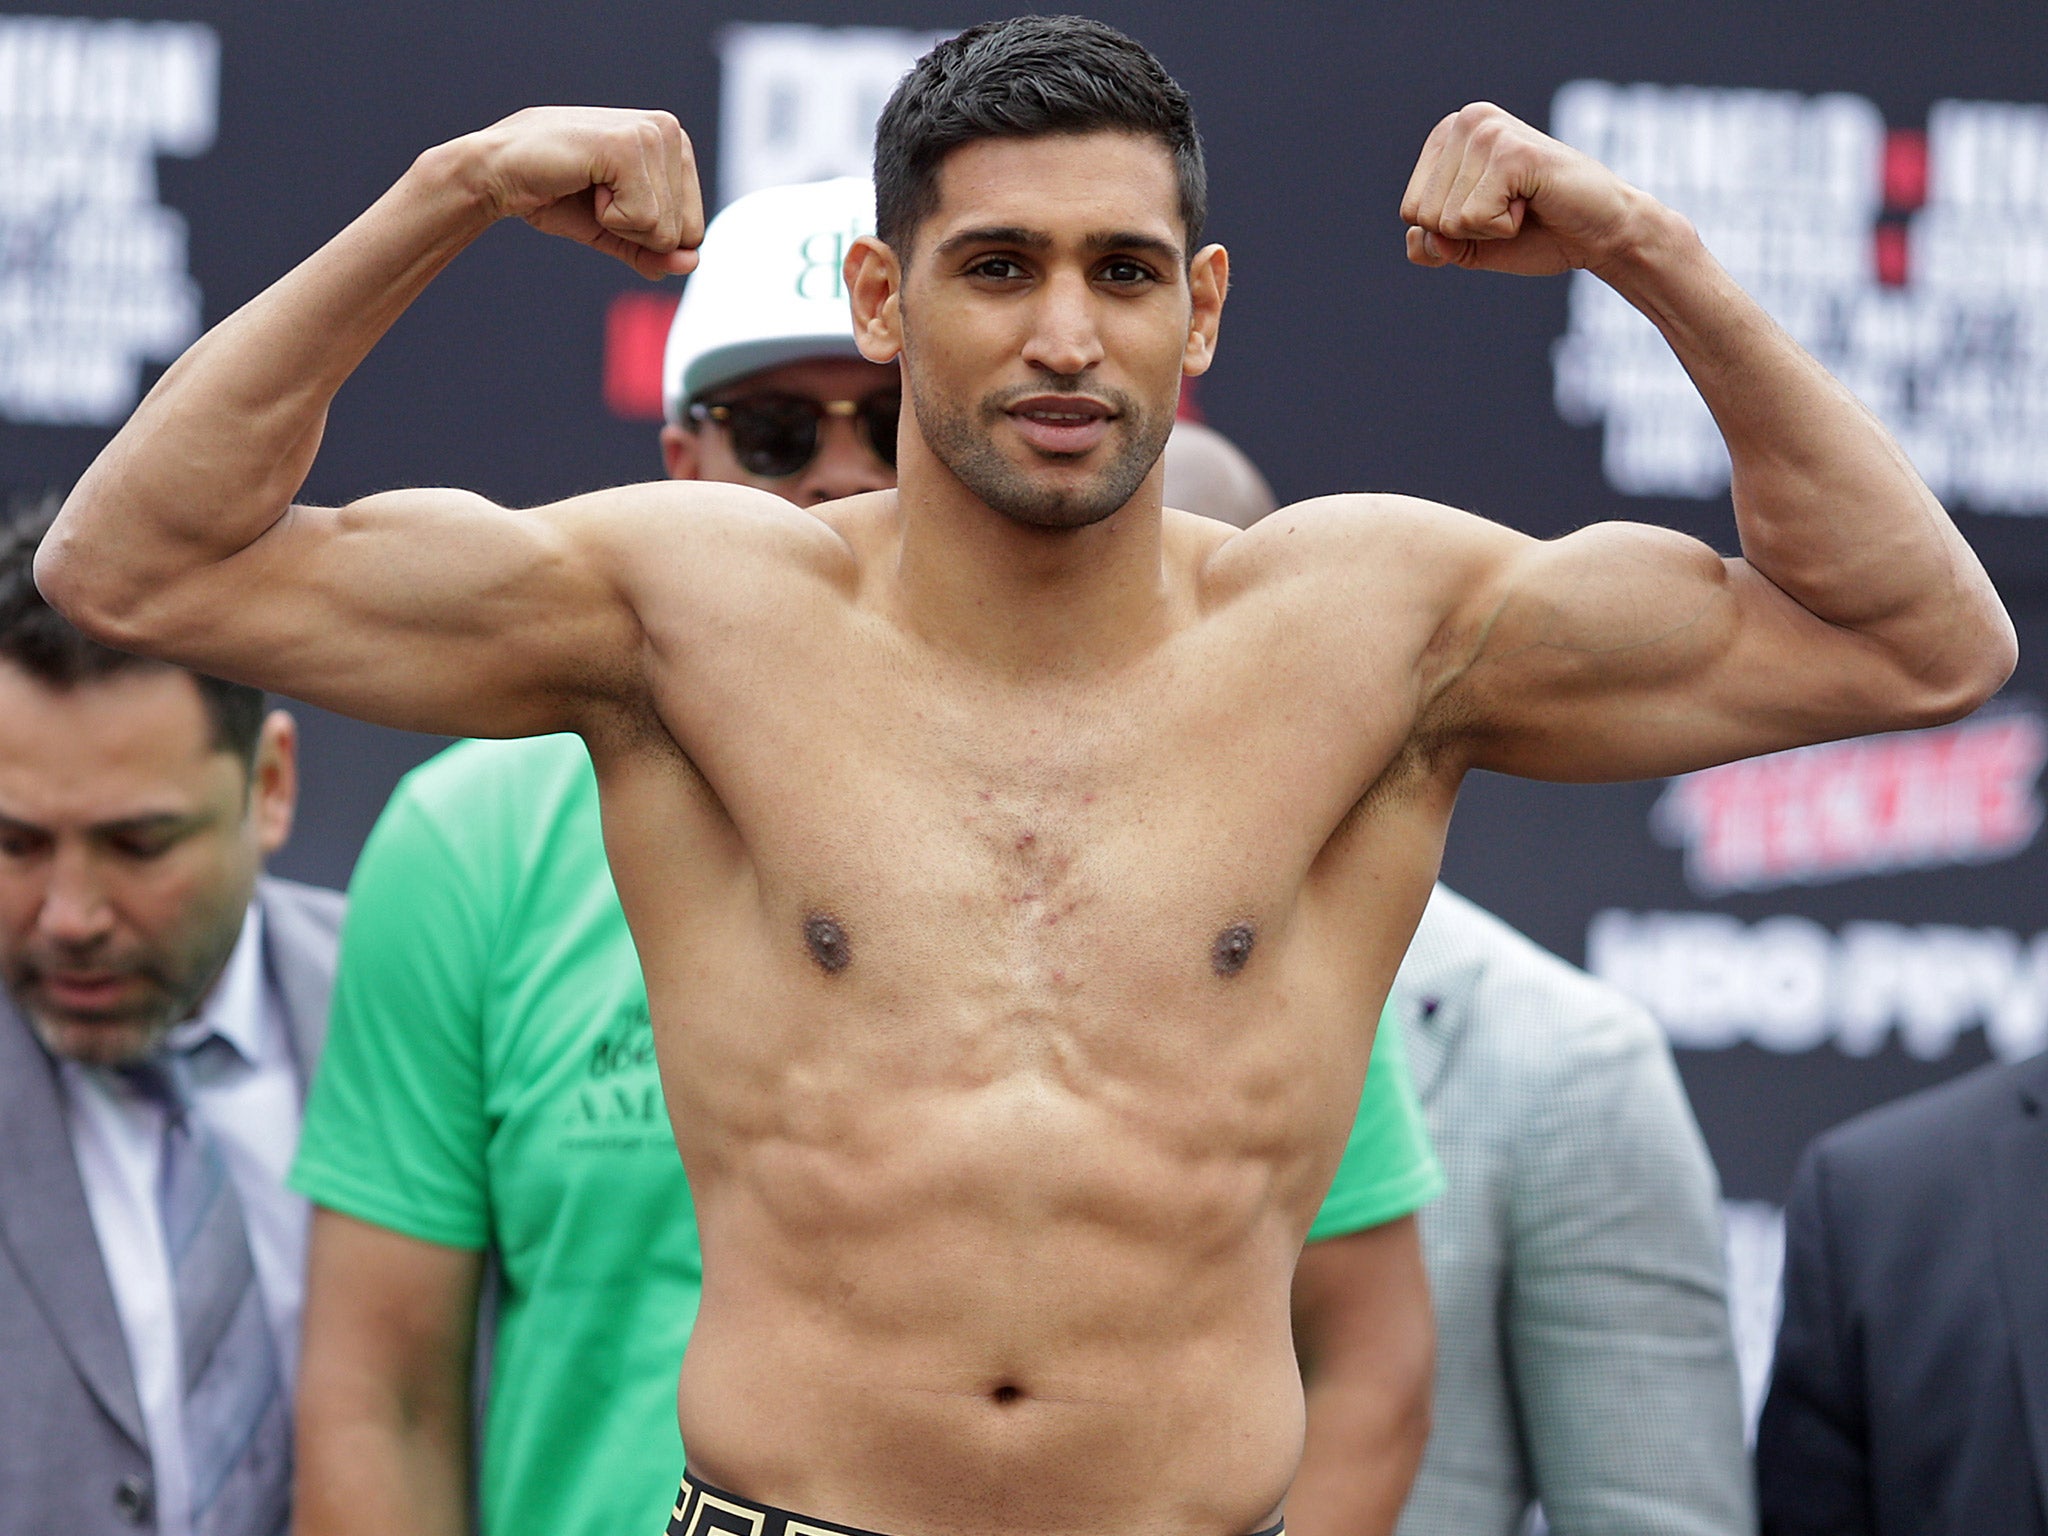 Amir Khan poses after weighing in for his bout with Saul Alvarez